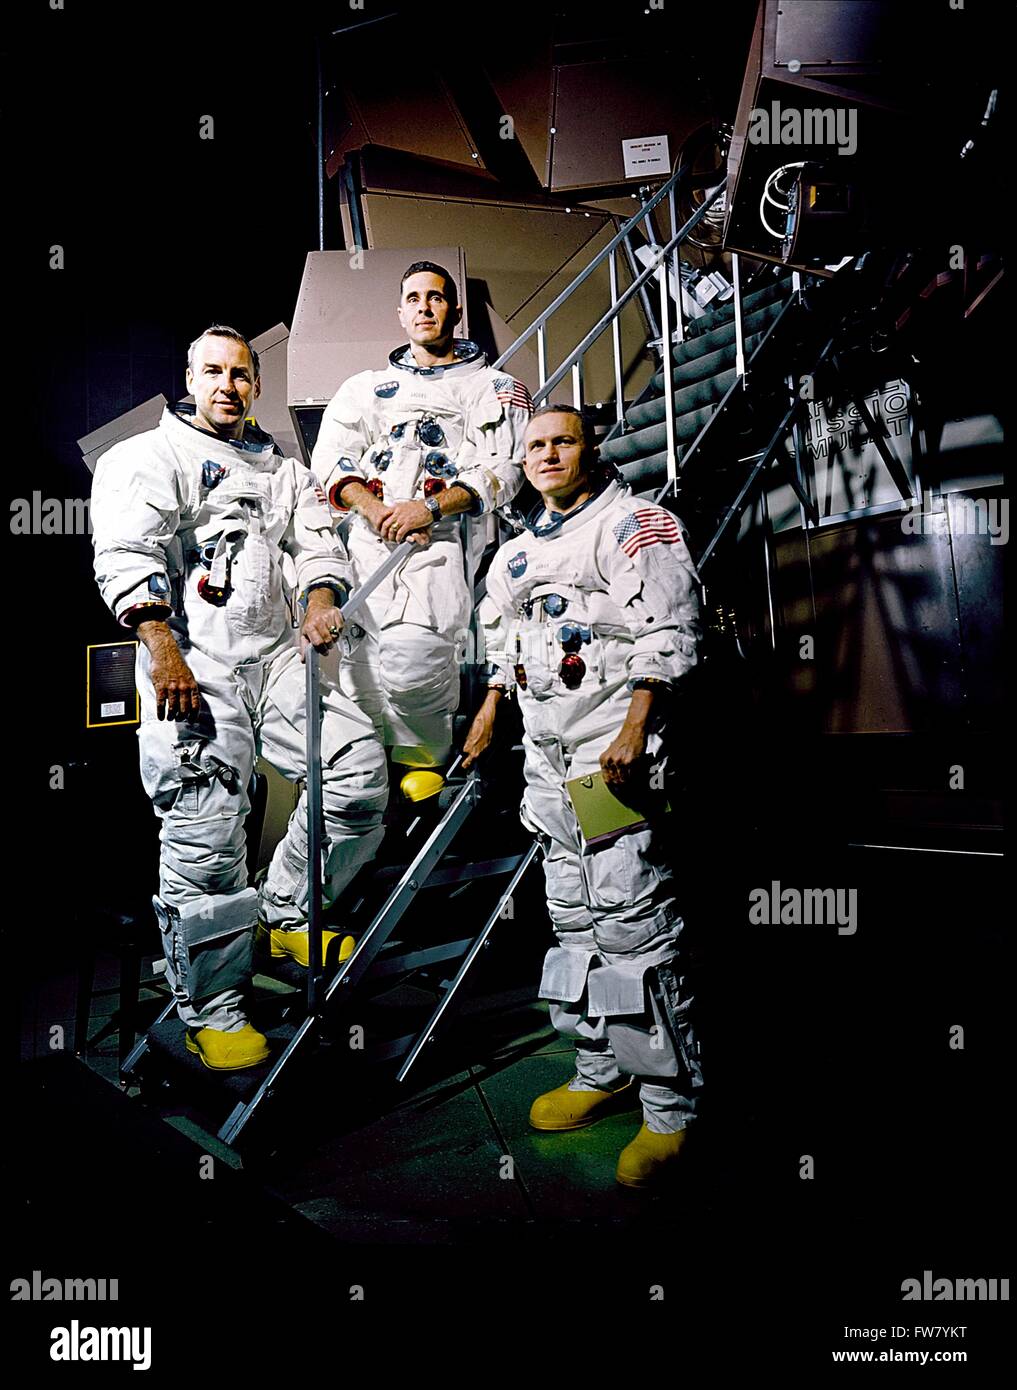 Prime crew of the Apollo 8 posed in their spacesuits in front of the flight simulator at the Kennedy Space Center November 22, 1968 in Cape Canaveral, Florida. From left to right are: James A. Lovell Jr., William A. Anders, and Frank Borman. Stock Photo